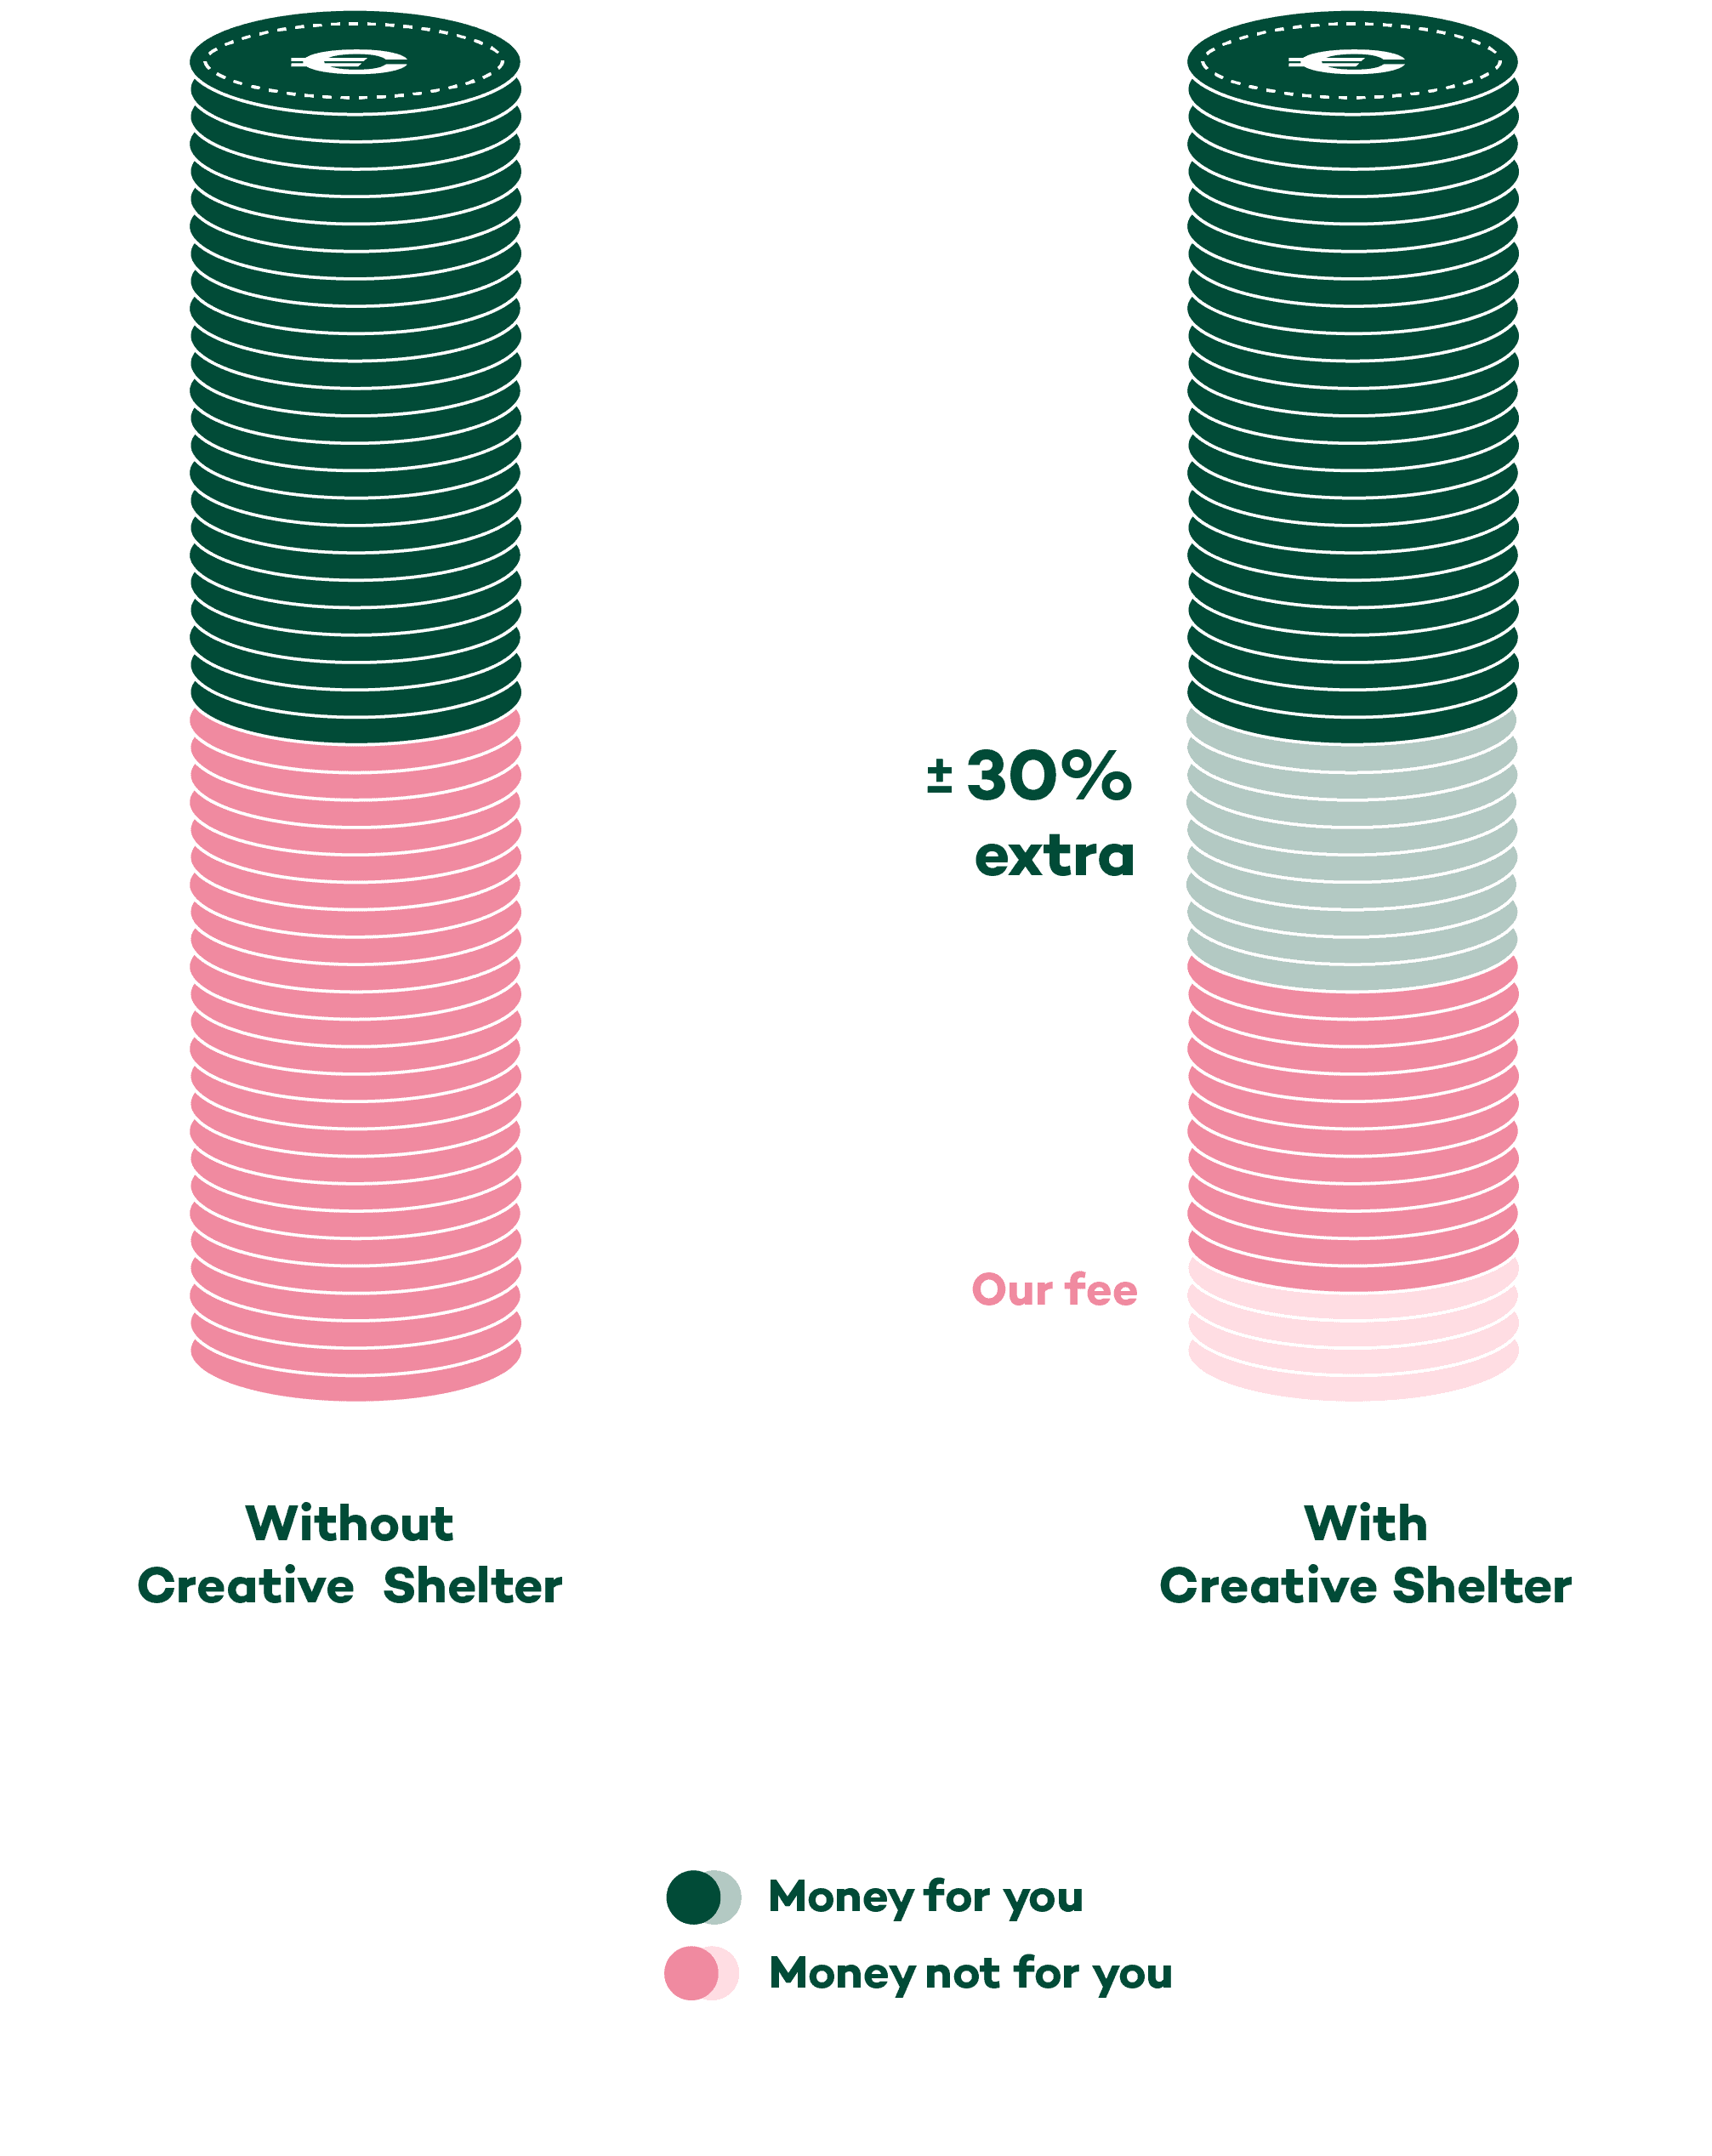 Tax advantage with and without Creative Shelter